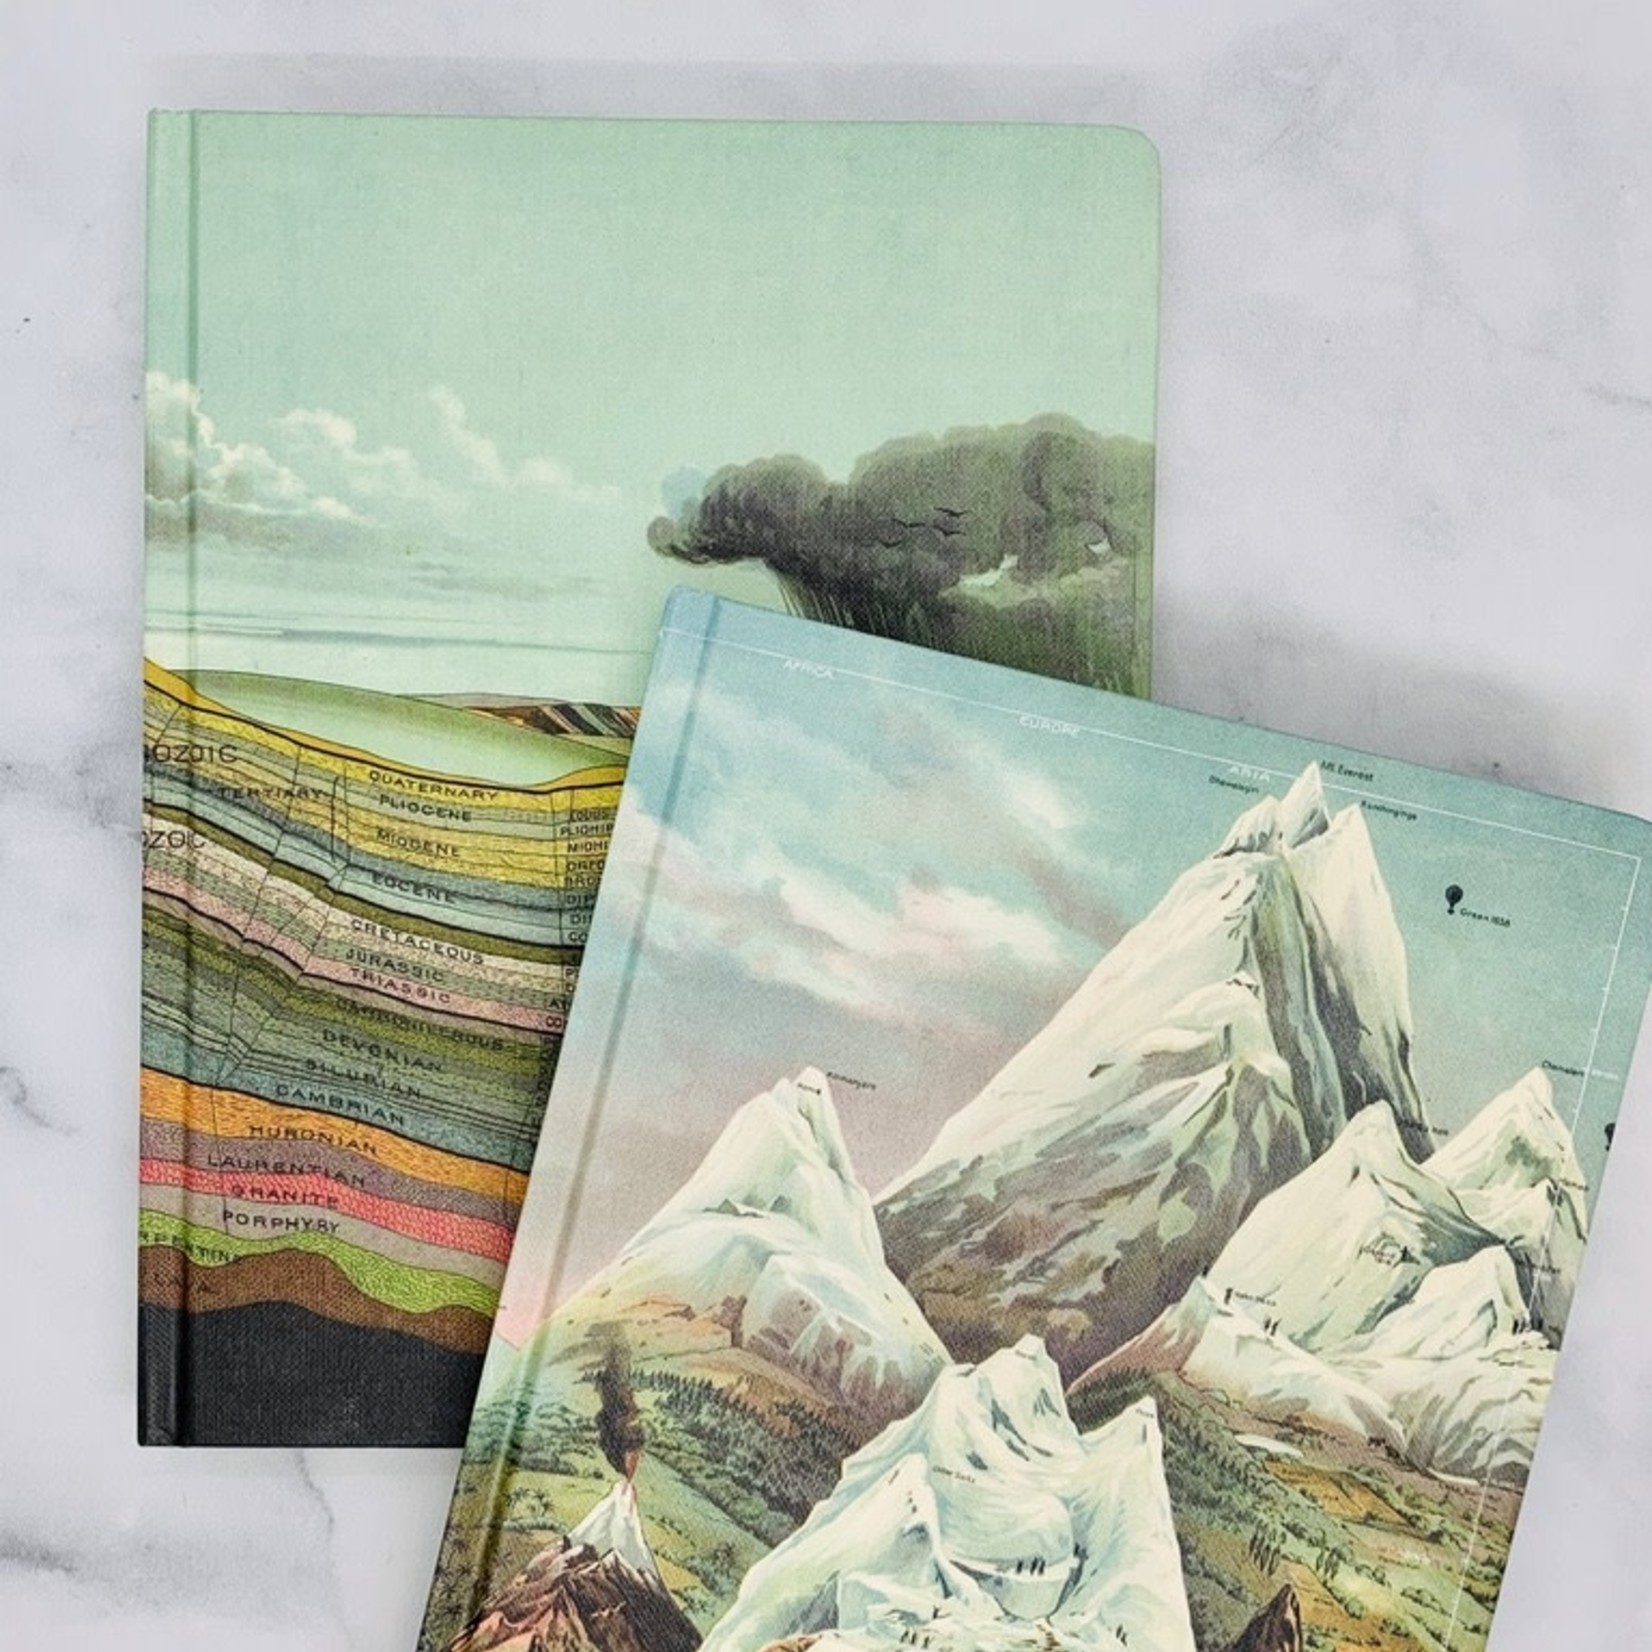 Cognitive Surplus Geology Notebooks